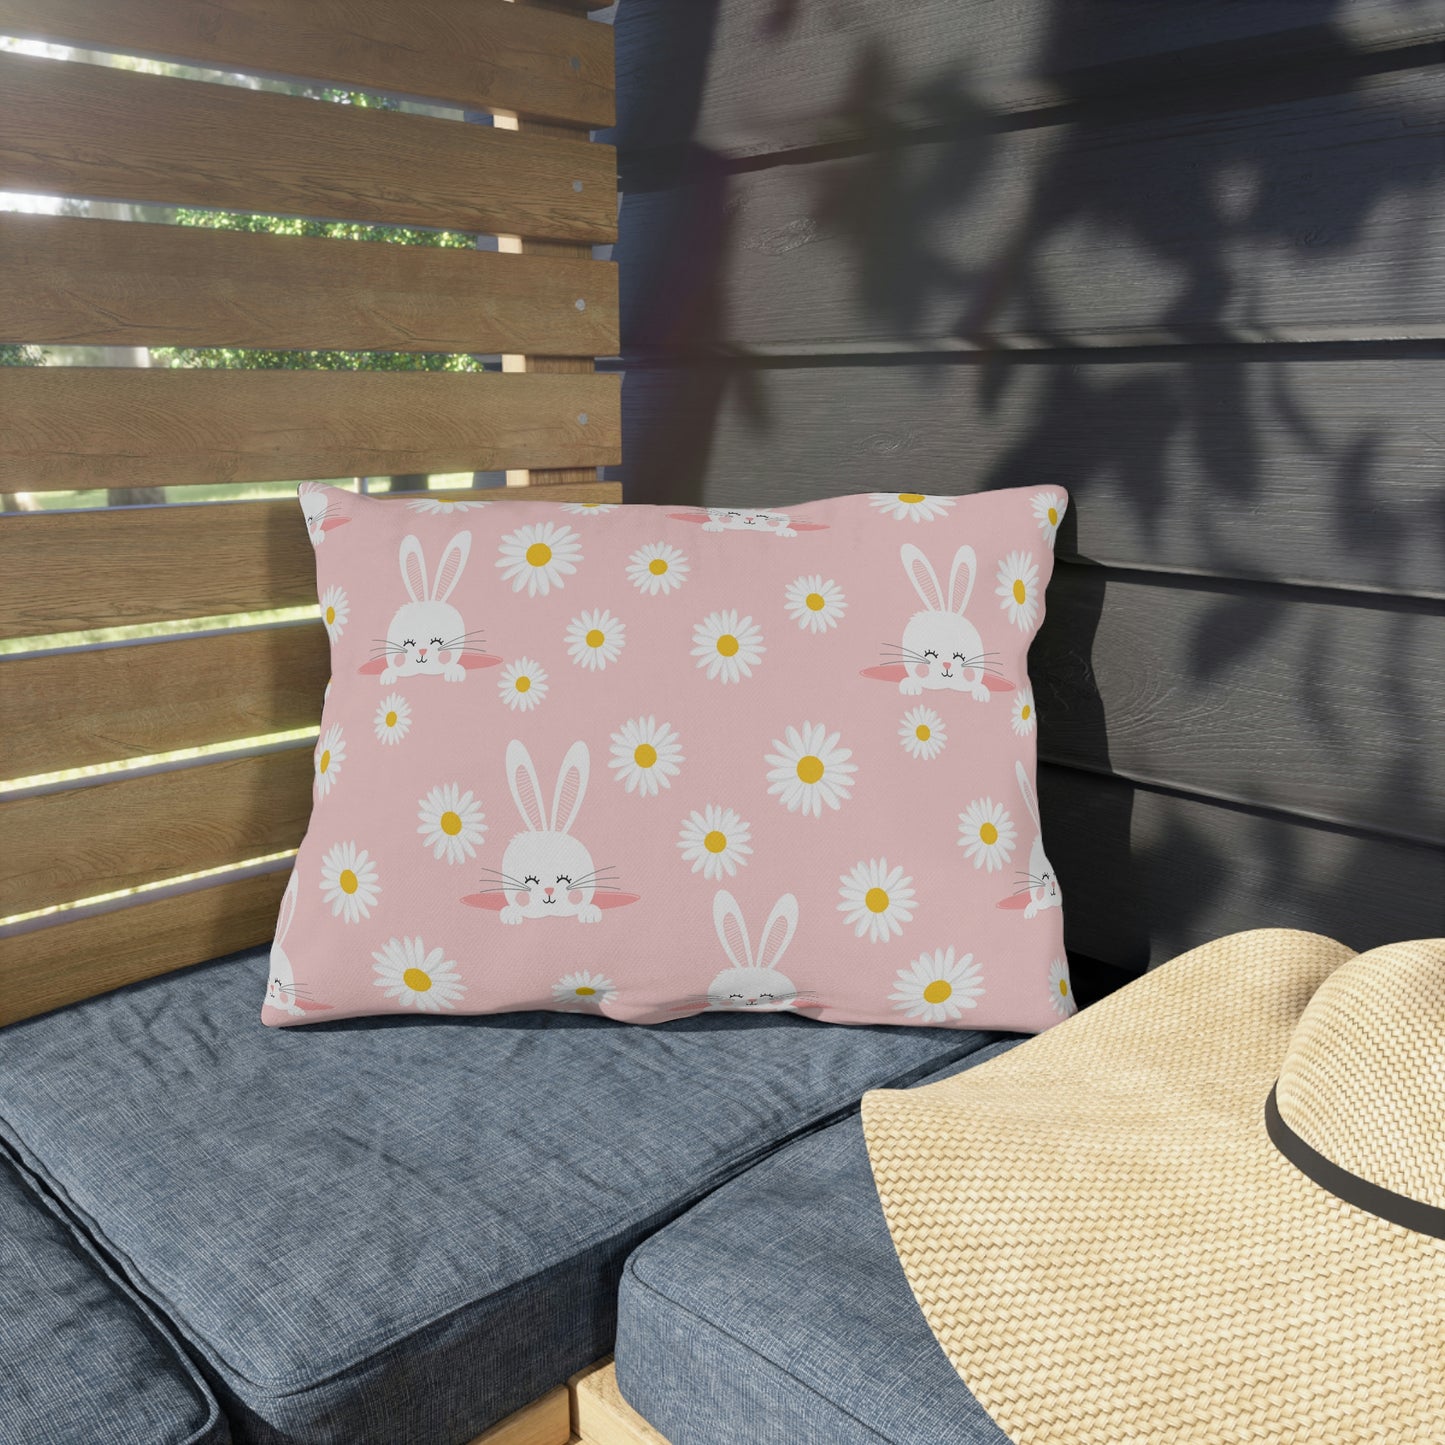 Smiling Bunnies and Daisies Outdoor Pillow